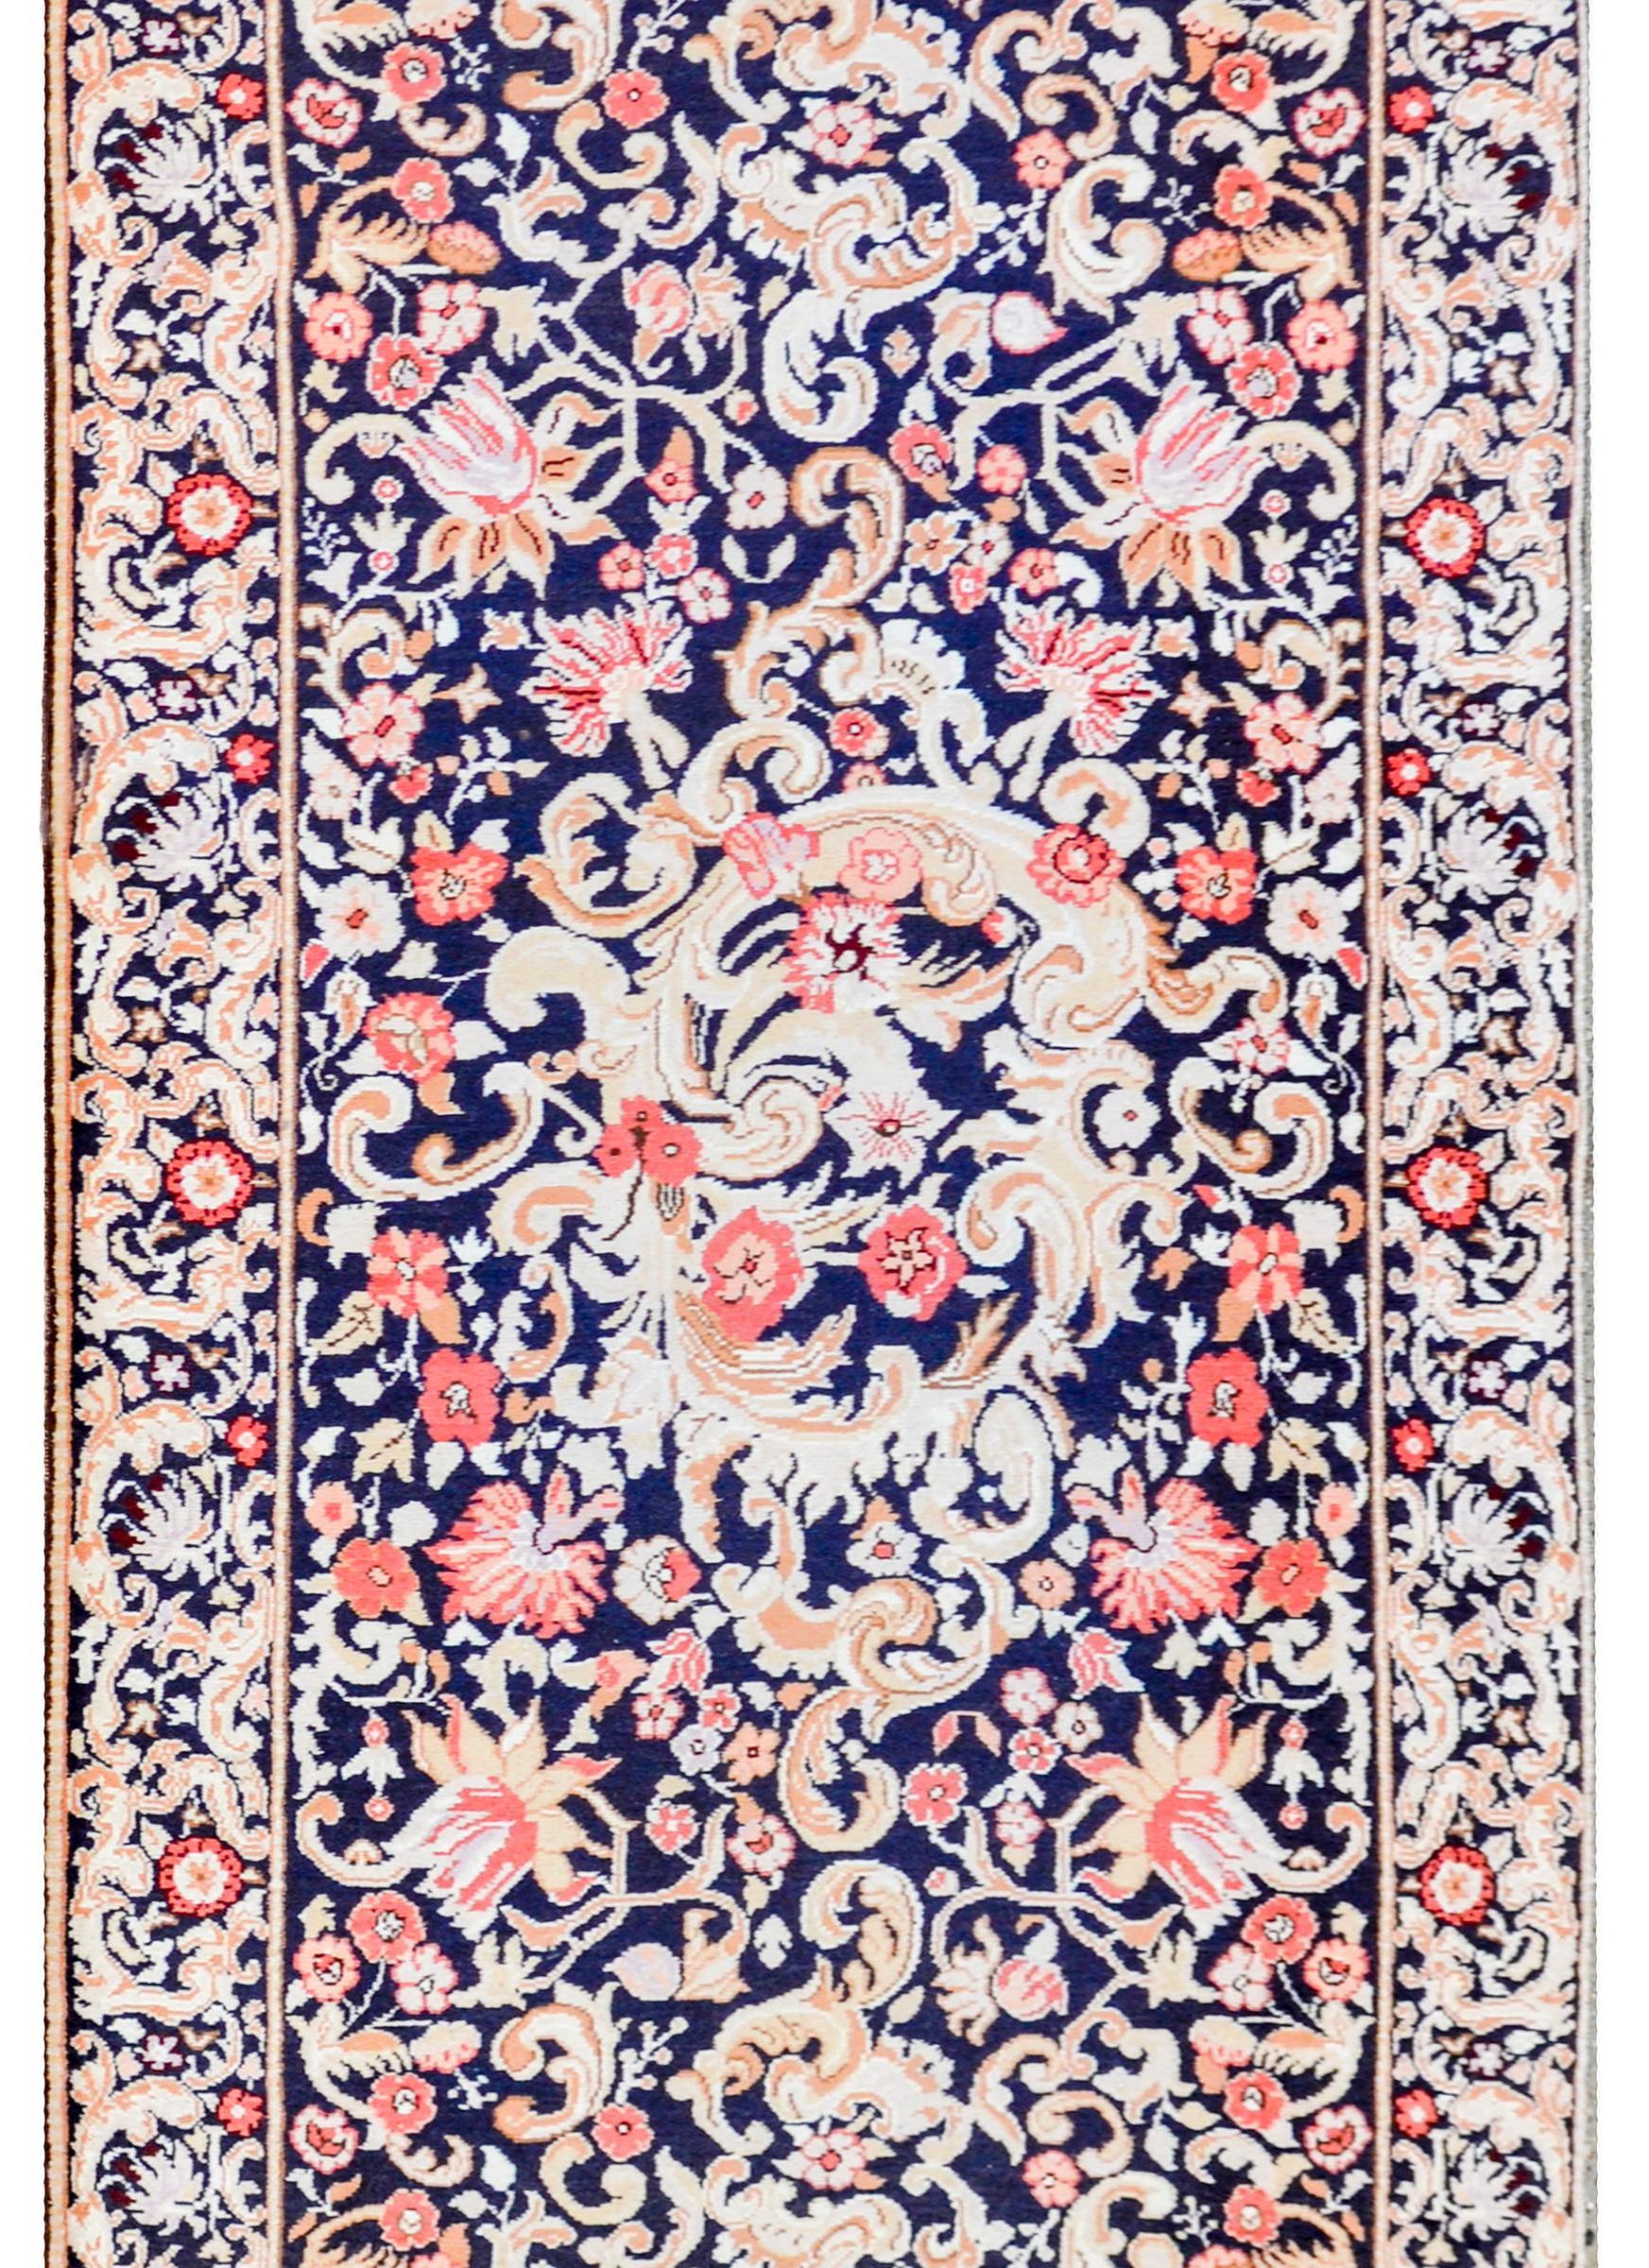 Early 20th century Persian Kareback rug with a densely woven baroque pattern of scrolling acanthus leaves and myriad flowers woven in varying shades of brown and gold, pink and crimson, on a black background. The border is similarly patterned, but